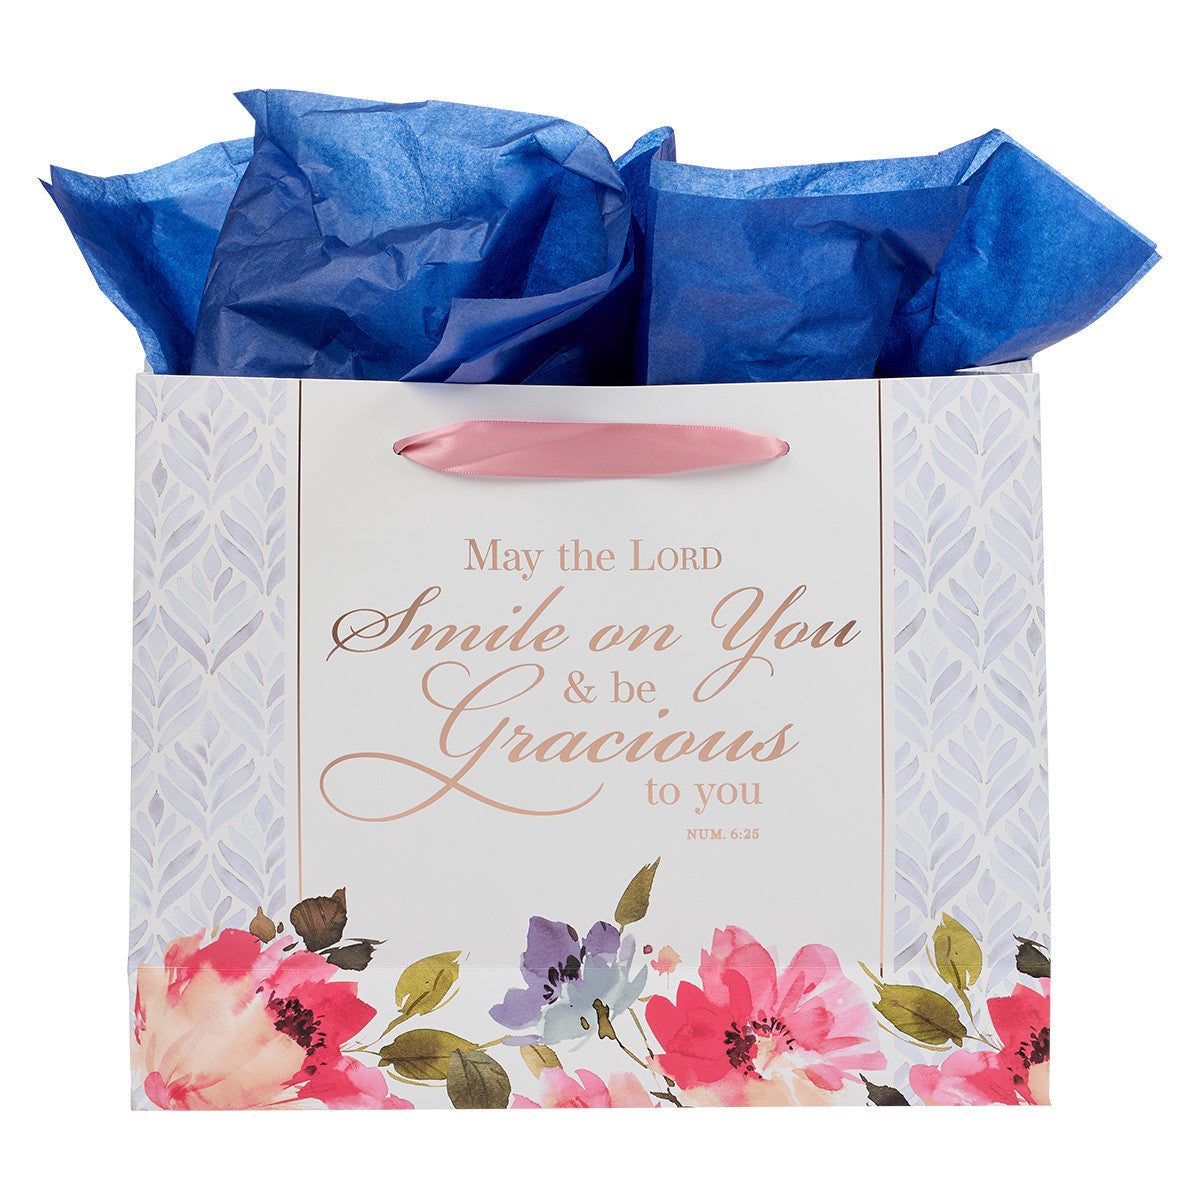 Smile and Be Gracious to You Floral Large Landscape Gift Bag and Card Set - Numbers 6:25 - The Christian Gift Company